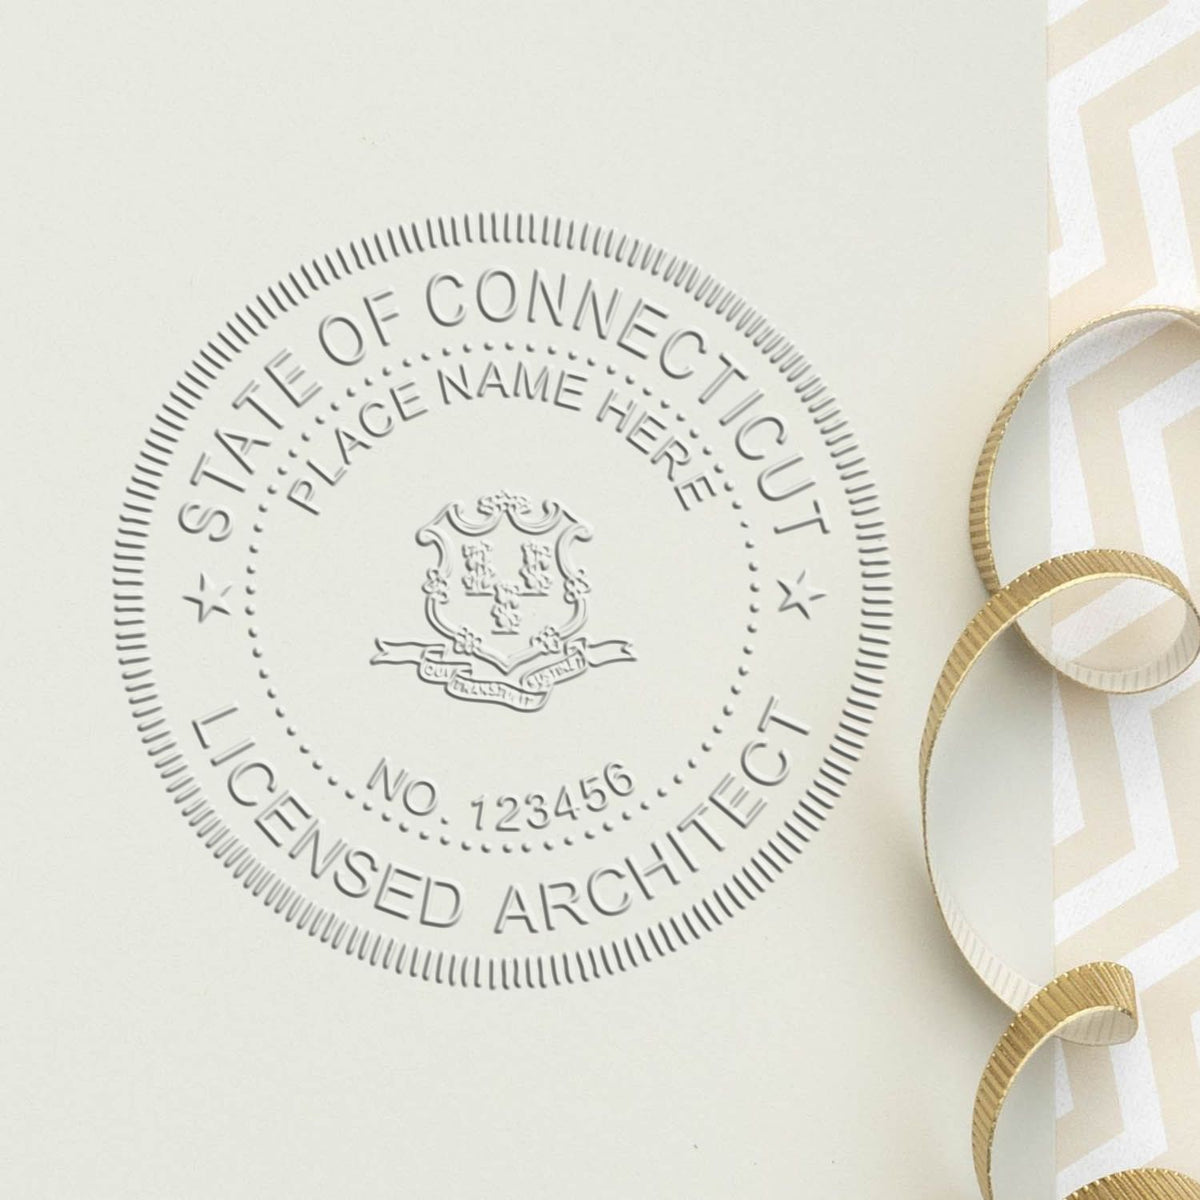 A lifestyle photo showing a stamped image of the Connecticut Desk Architect Embossing Seal on a piece of paper